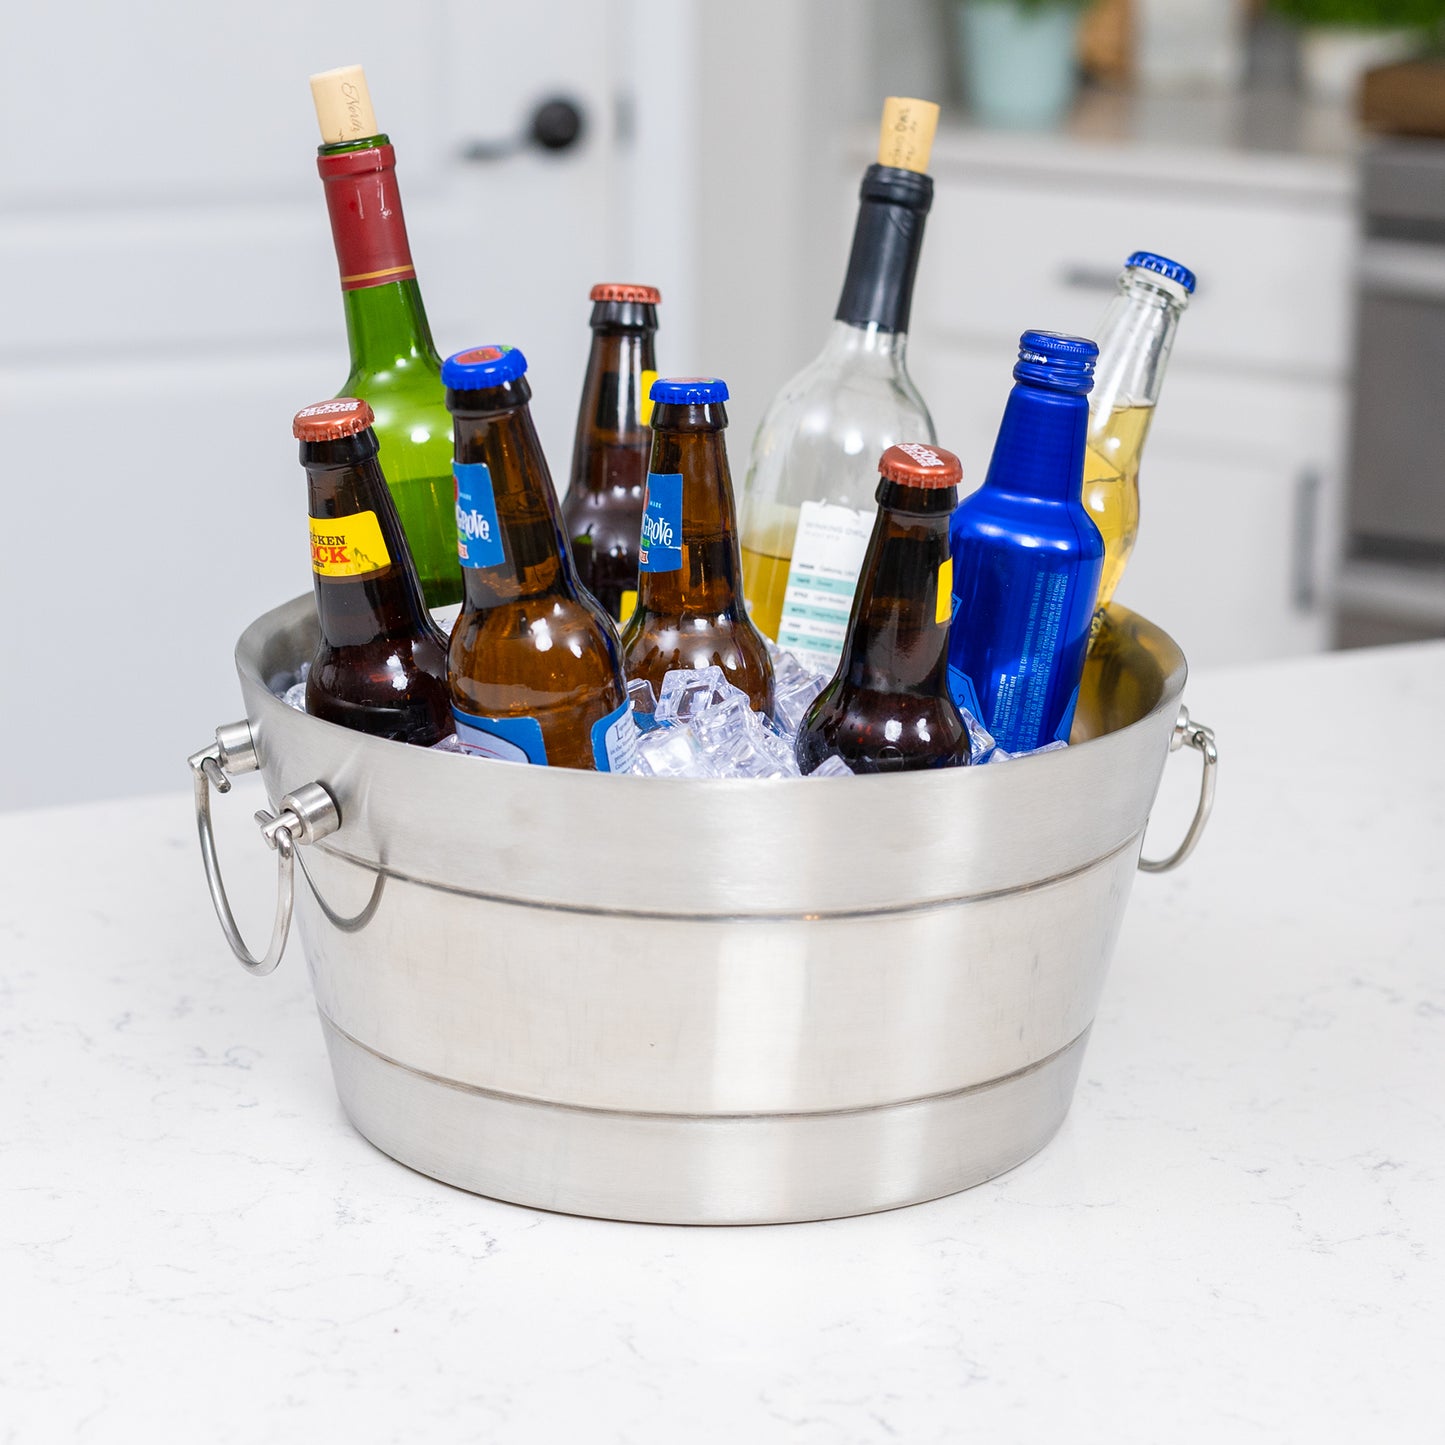 Personalized Beverage Tub Insulated Stainless Steel - Anchored Ribbed